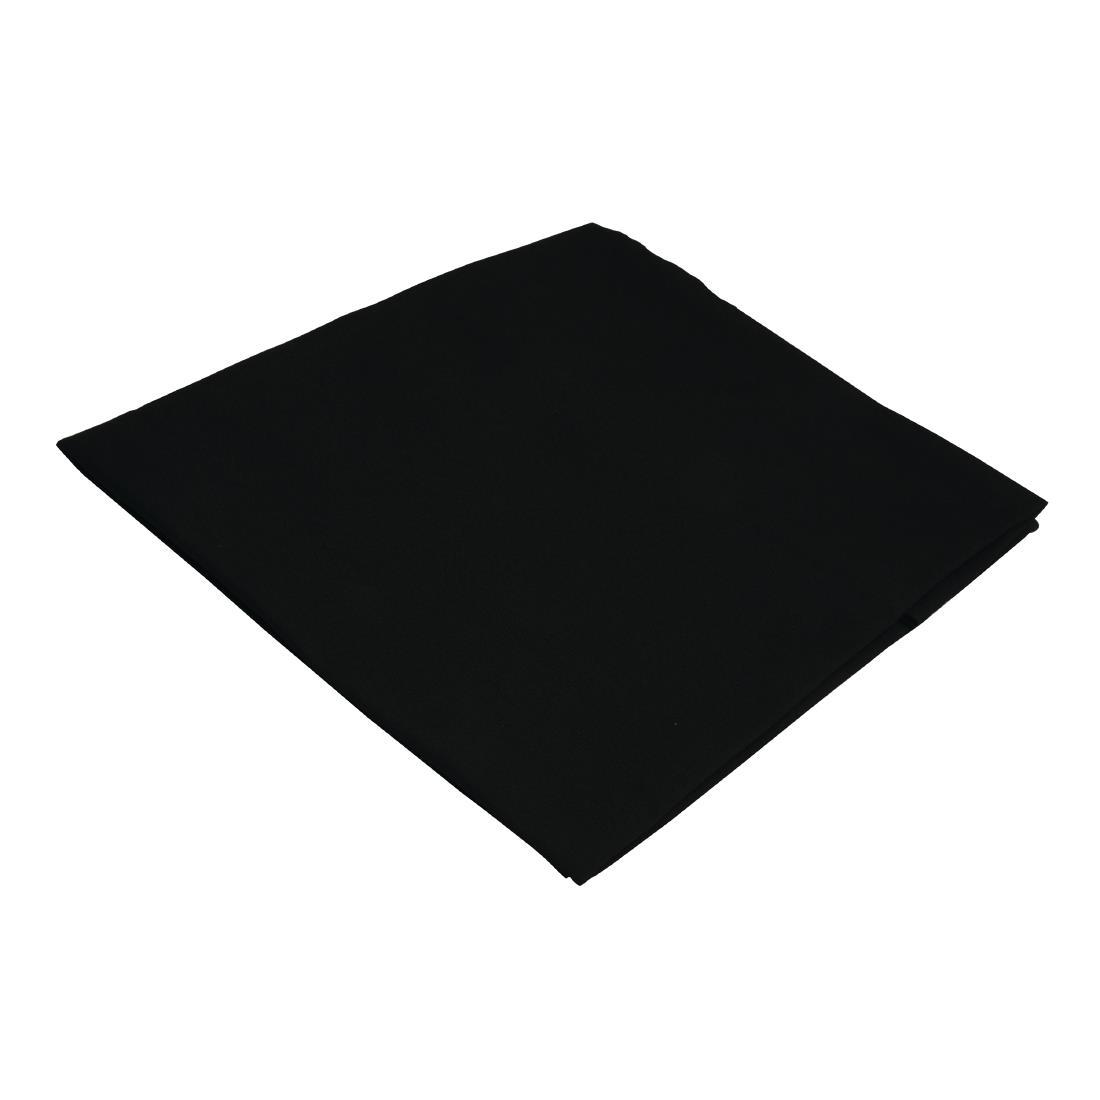 Occasions Tablecloth Black 900 x 900mm - HB562  - 2